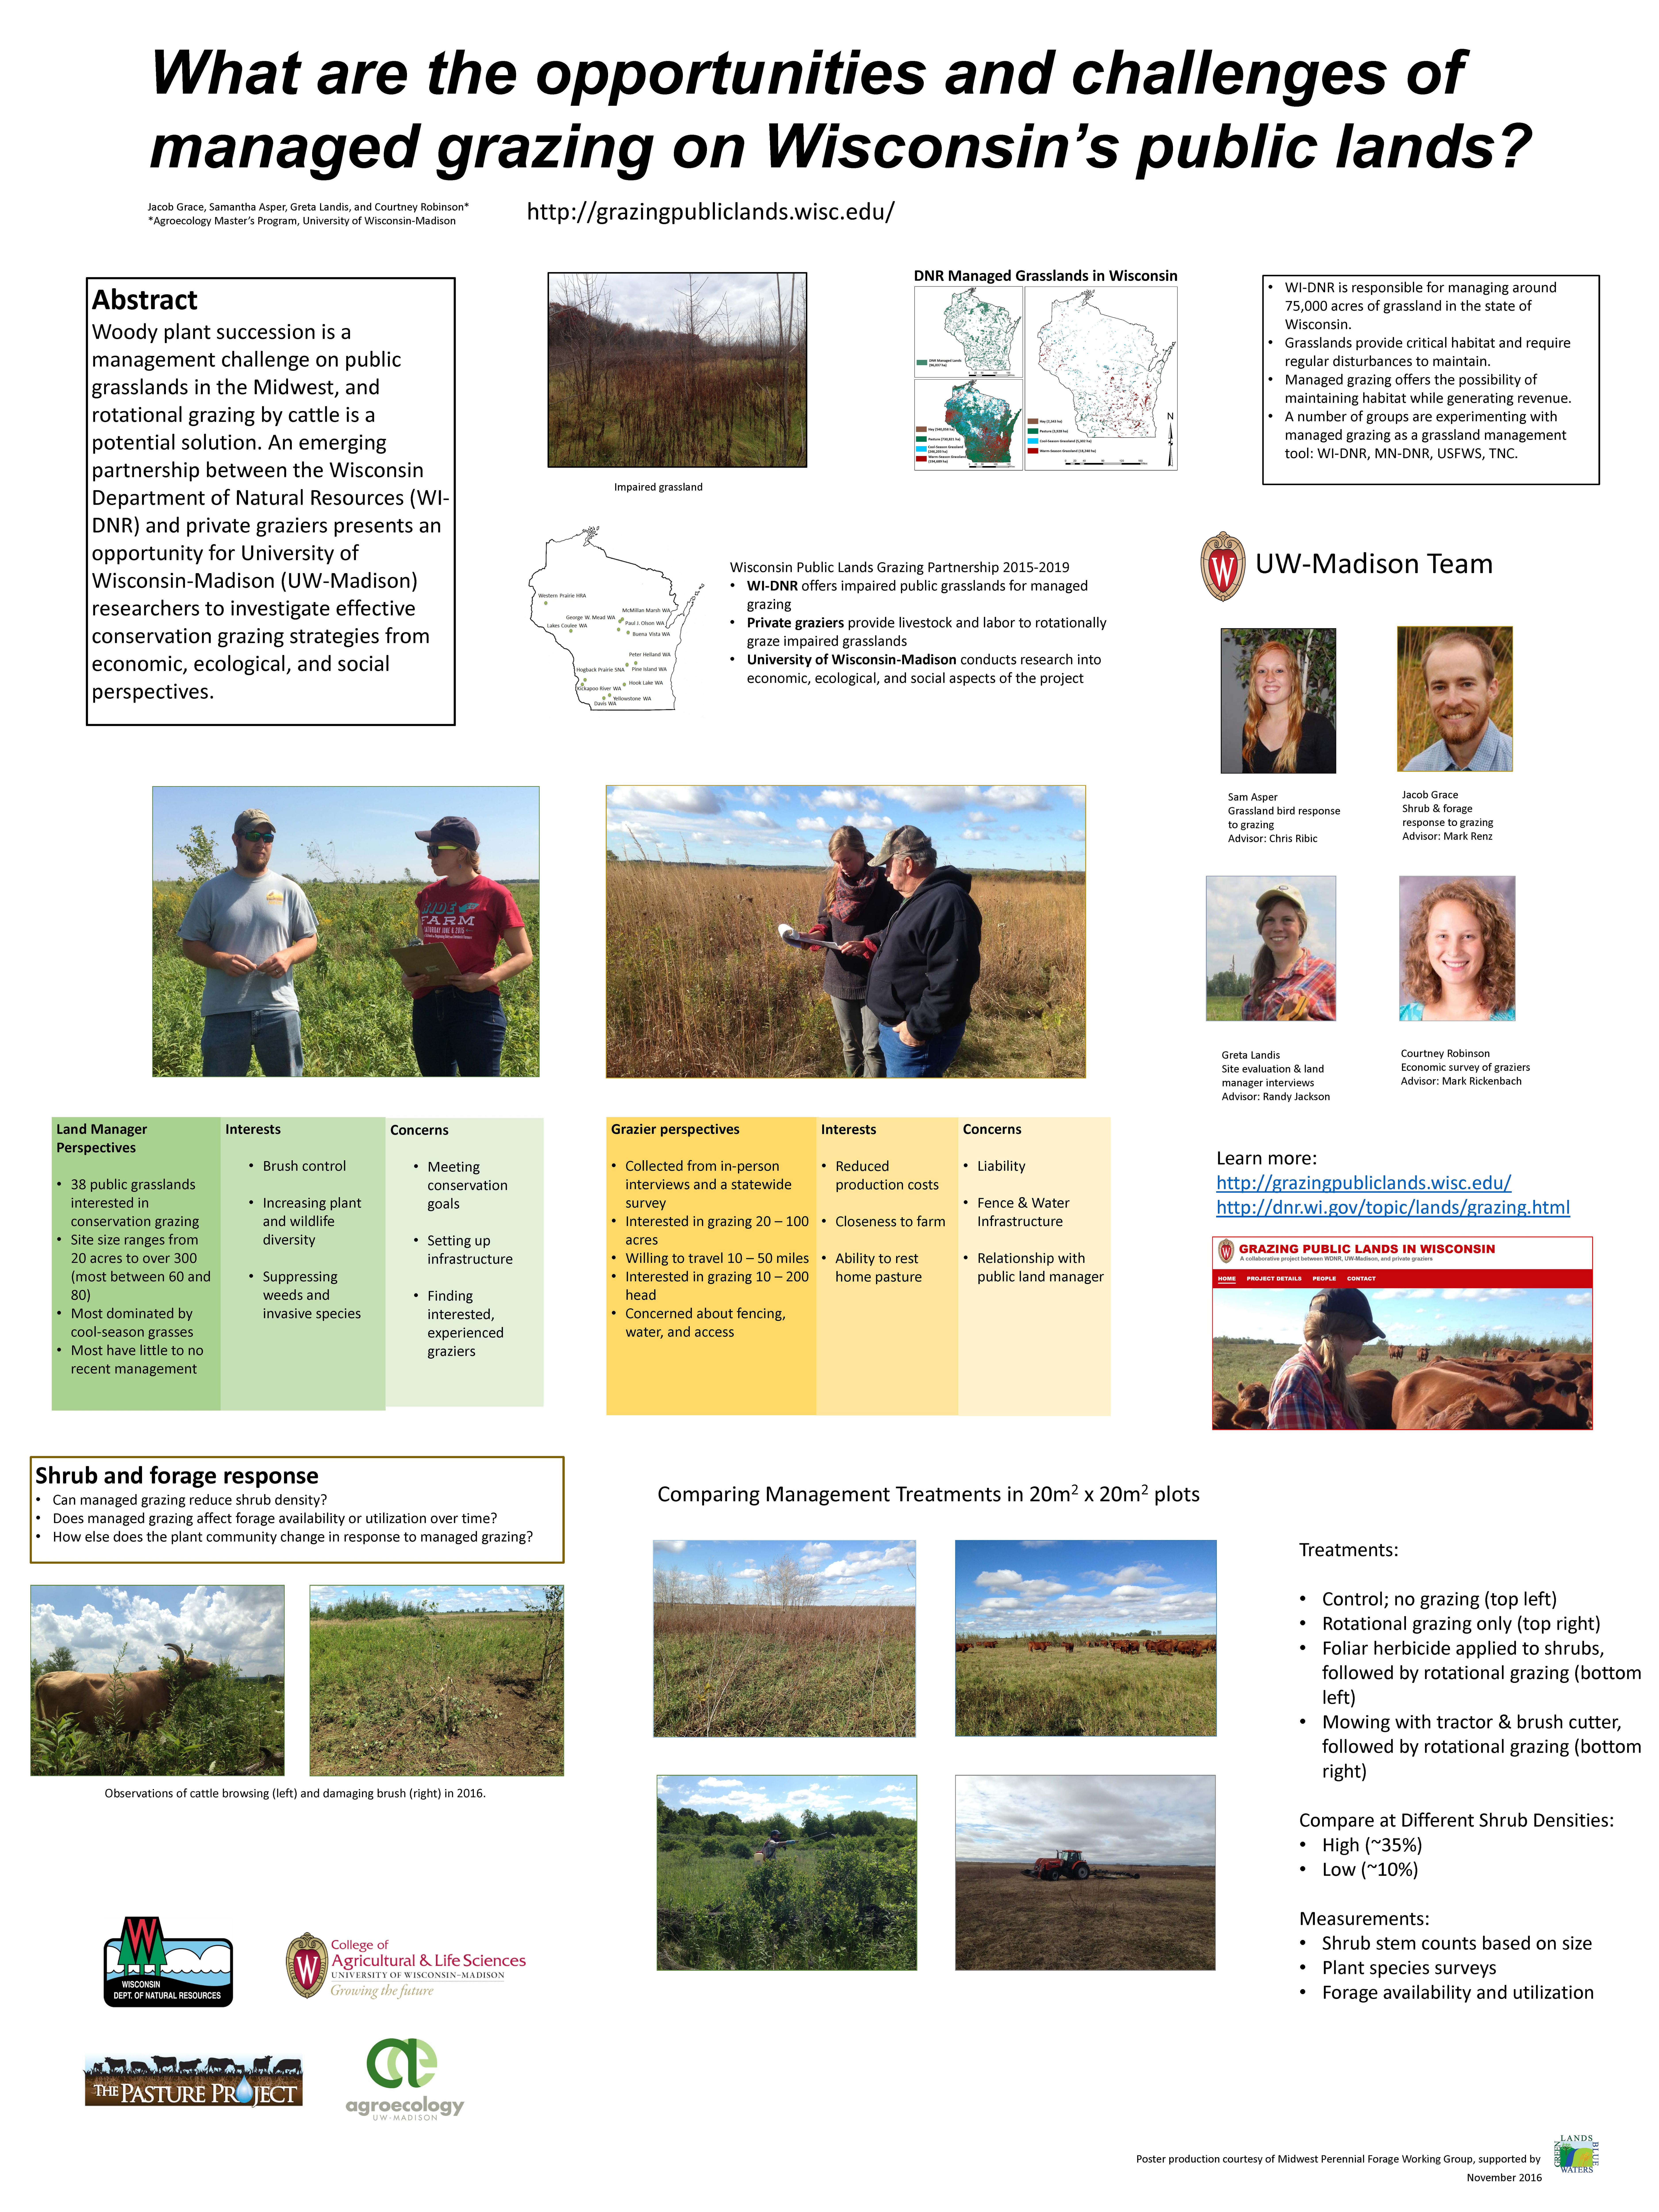 Wisconsin grazing of public lands poster from 2016 Green Lands Blue Waters conference